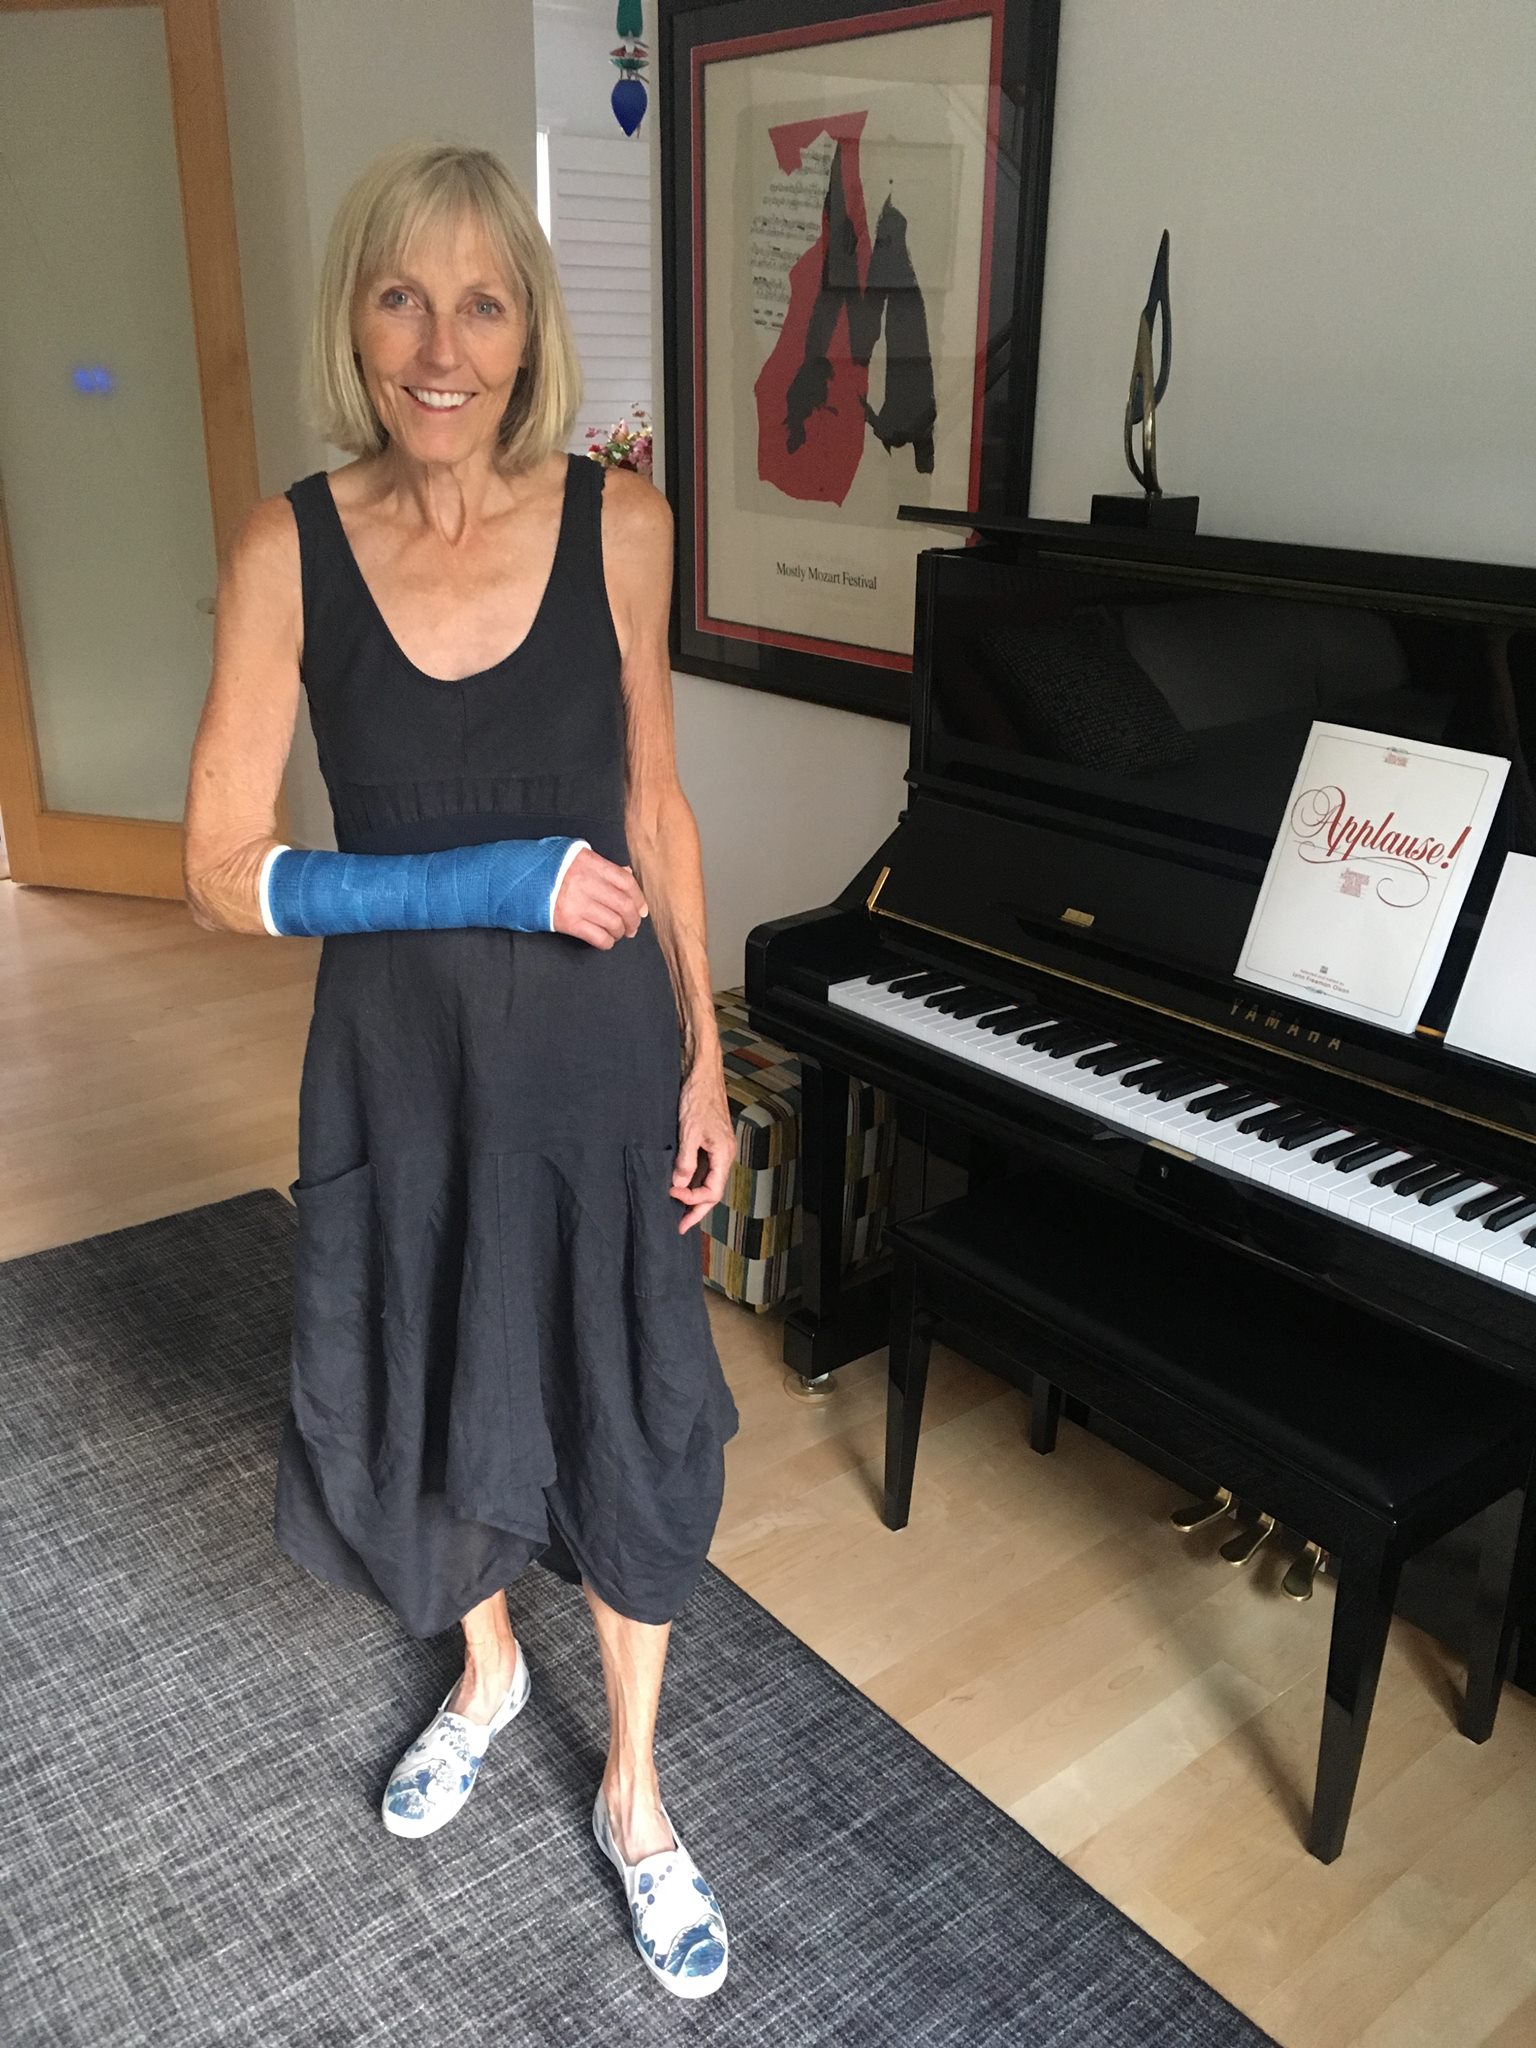 Pat with arm in new blue cast and wearing shoes that Alex created about 10 years ago.